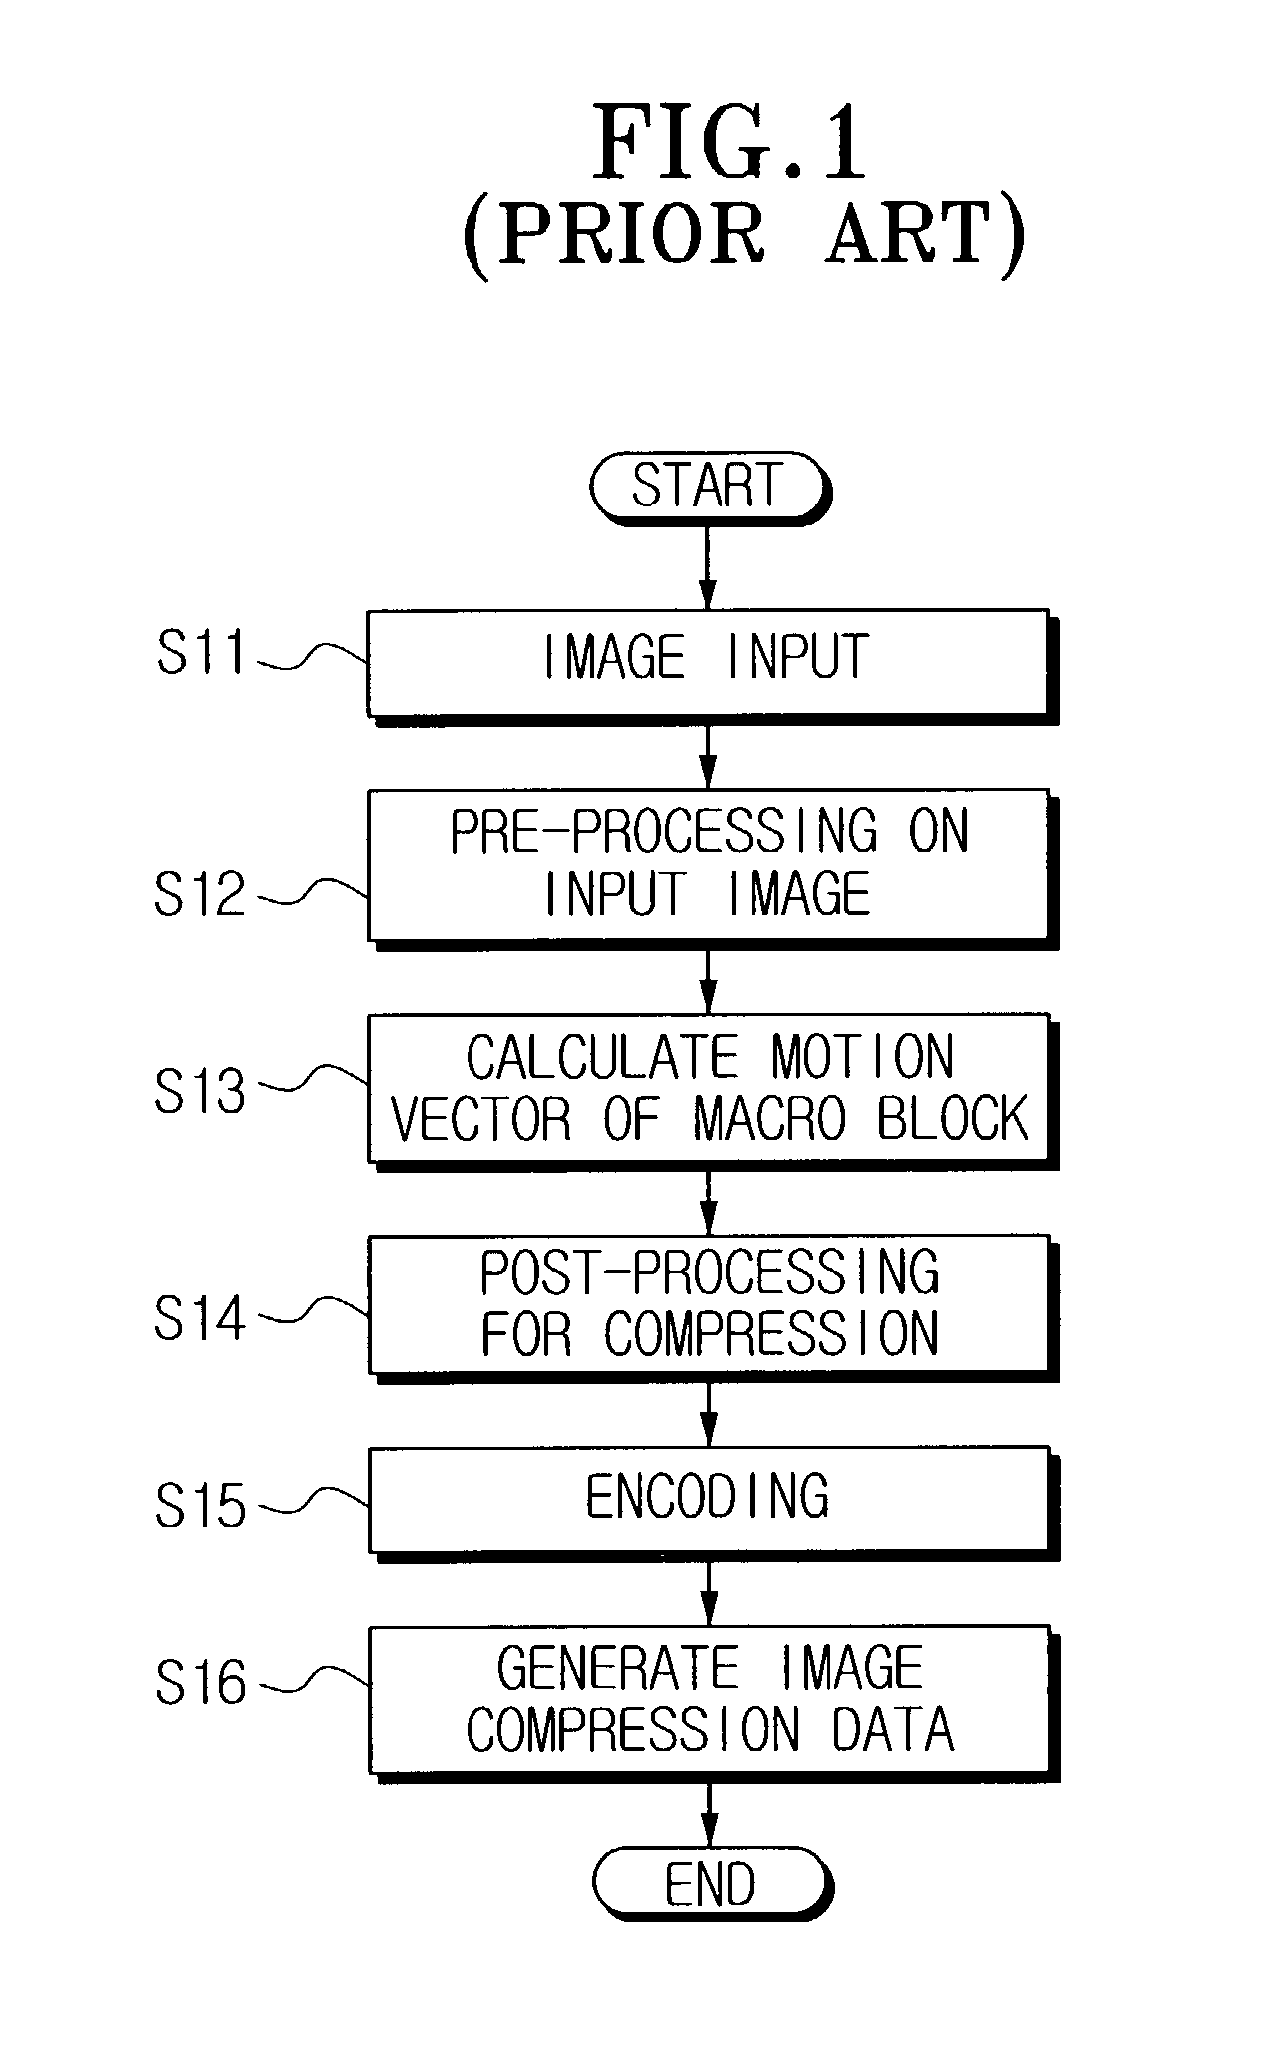 Apparatus and method for controlling a camera using a video compression algorithm